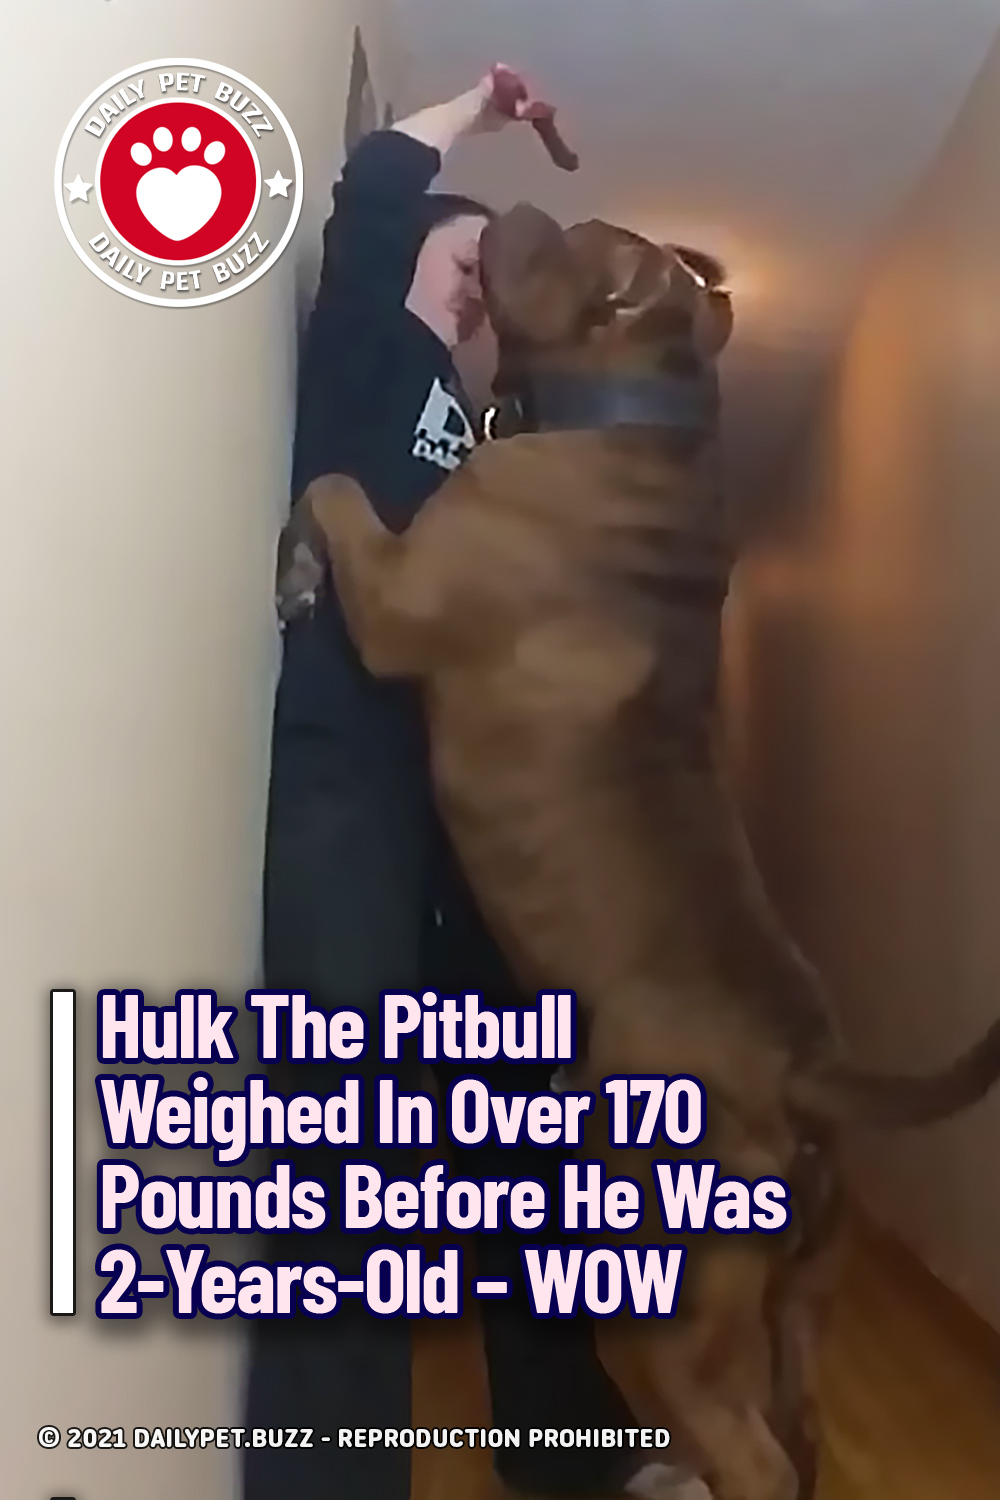 Hulk The Pitbull Weighed In Over 170 Pounds Before He Was 2-Years-Old – WOW